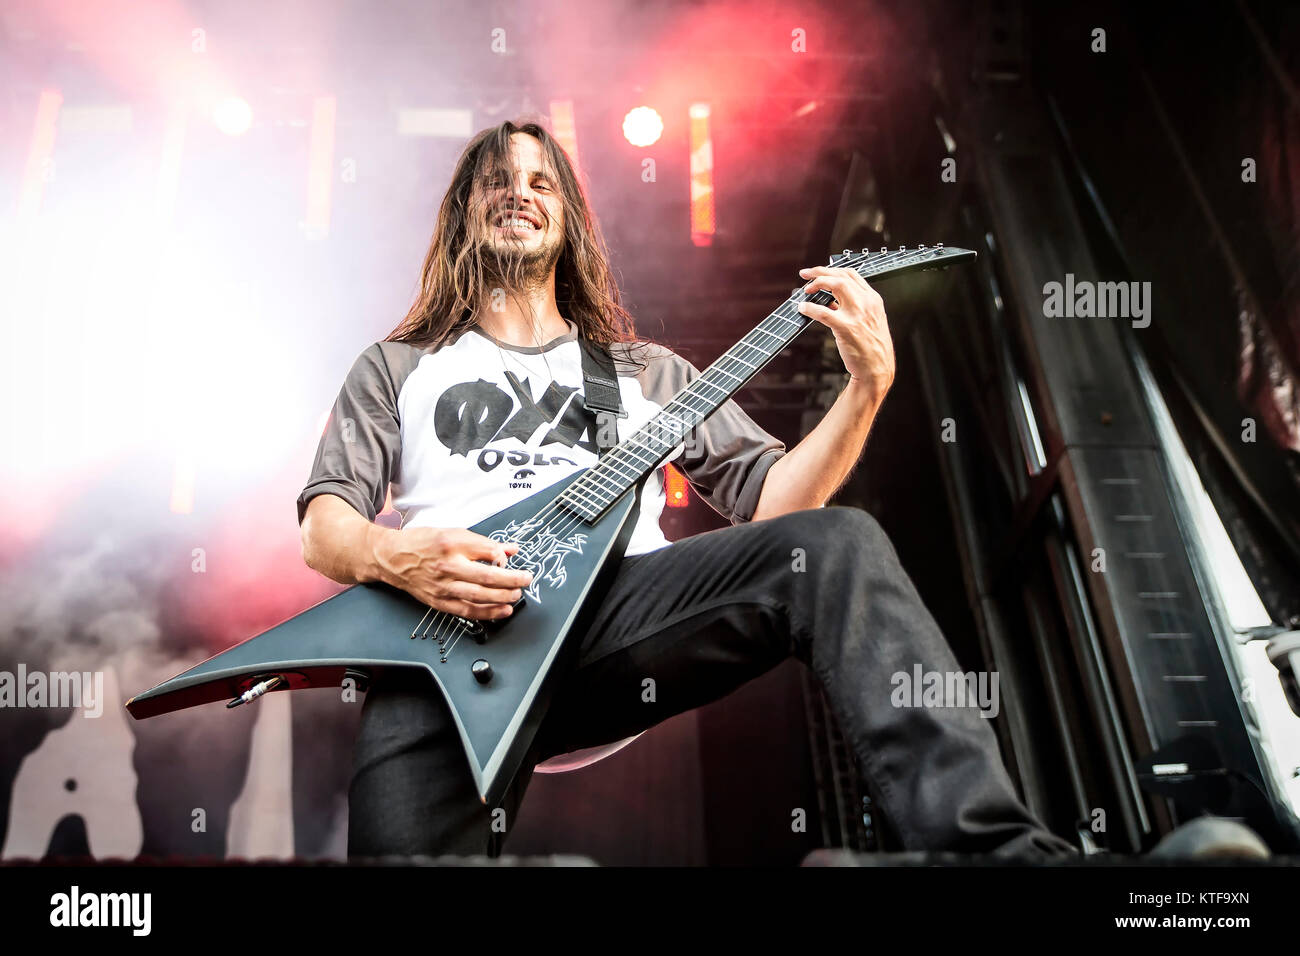 The French death metal band Gojira performs a live concert at the Norwegian music festival Øyafestivalen 2014. Here guitarist Christian Andreu is seen live on stage. Norway, 08/08 2014. Stock Photo